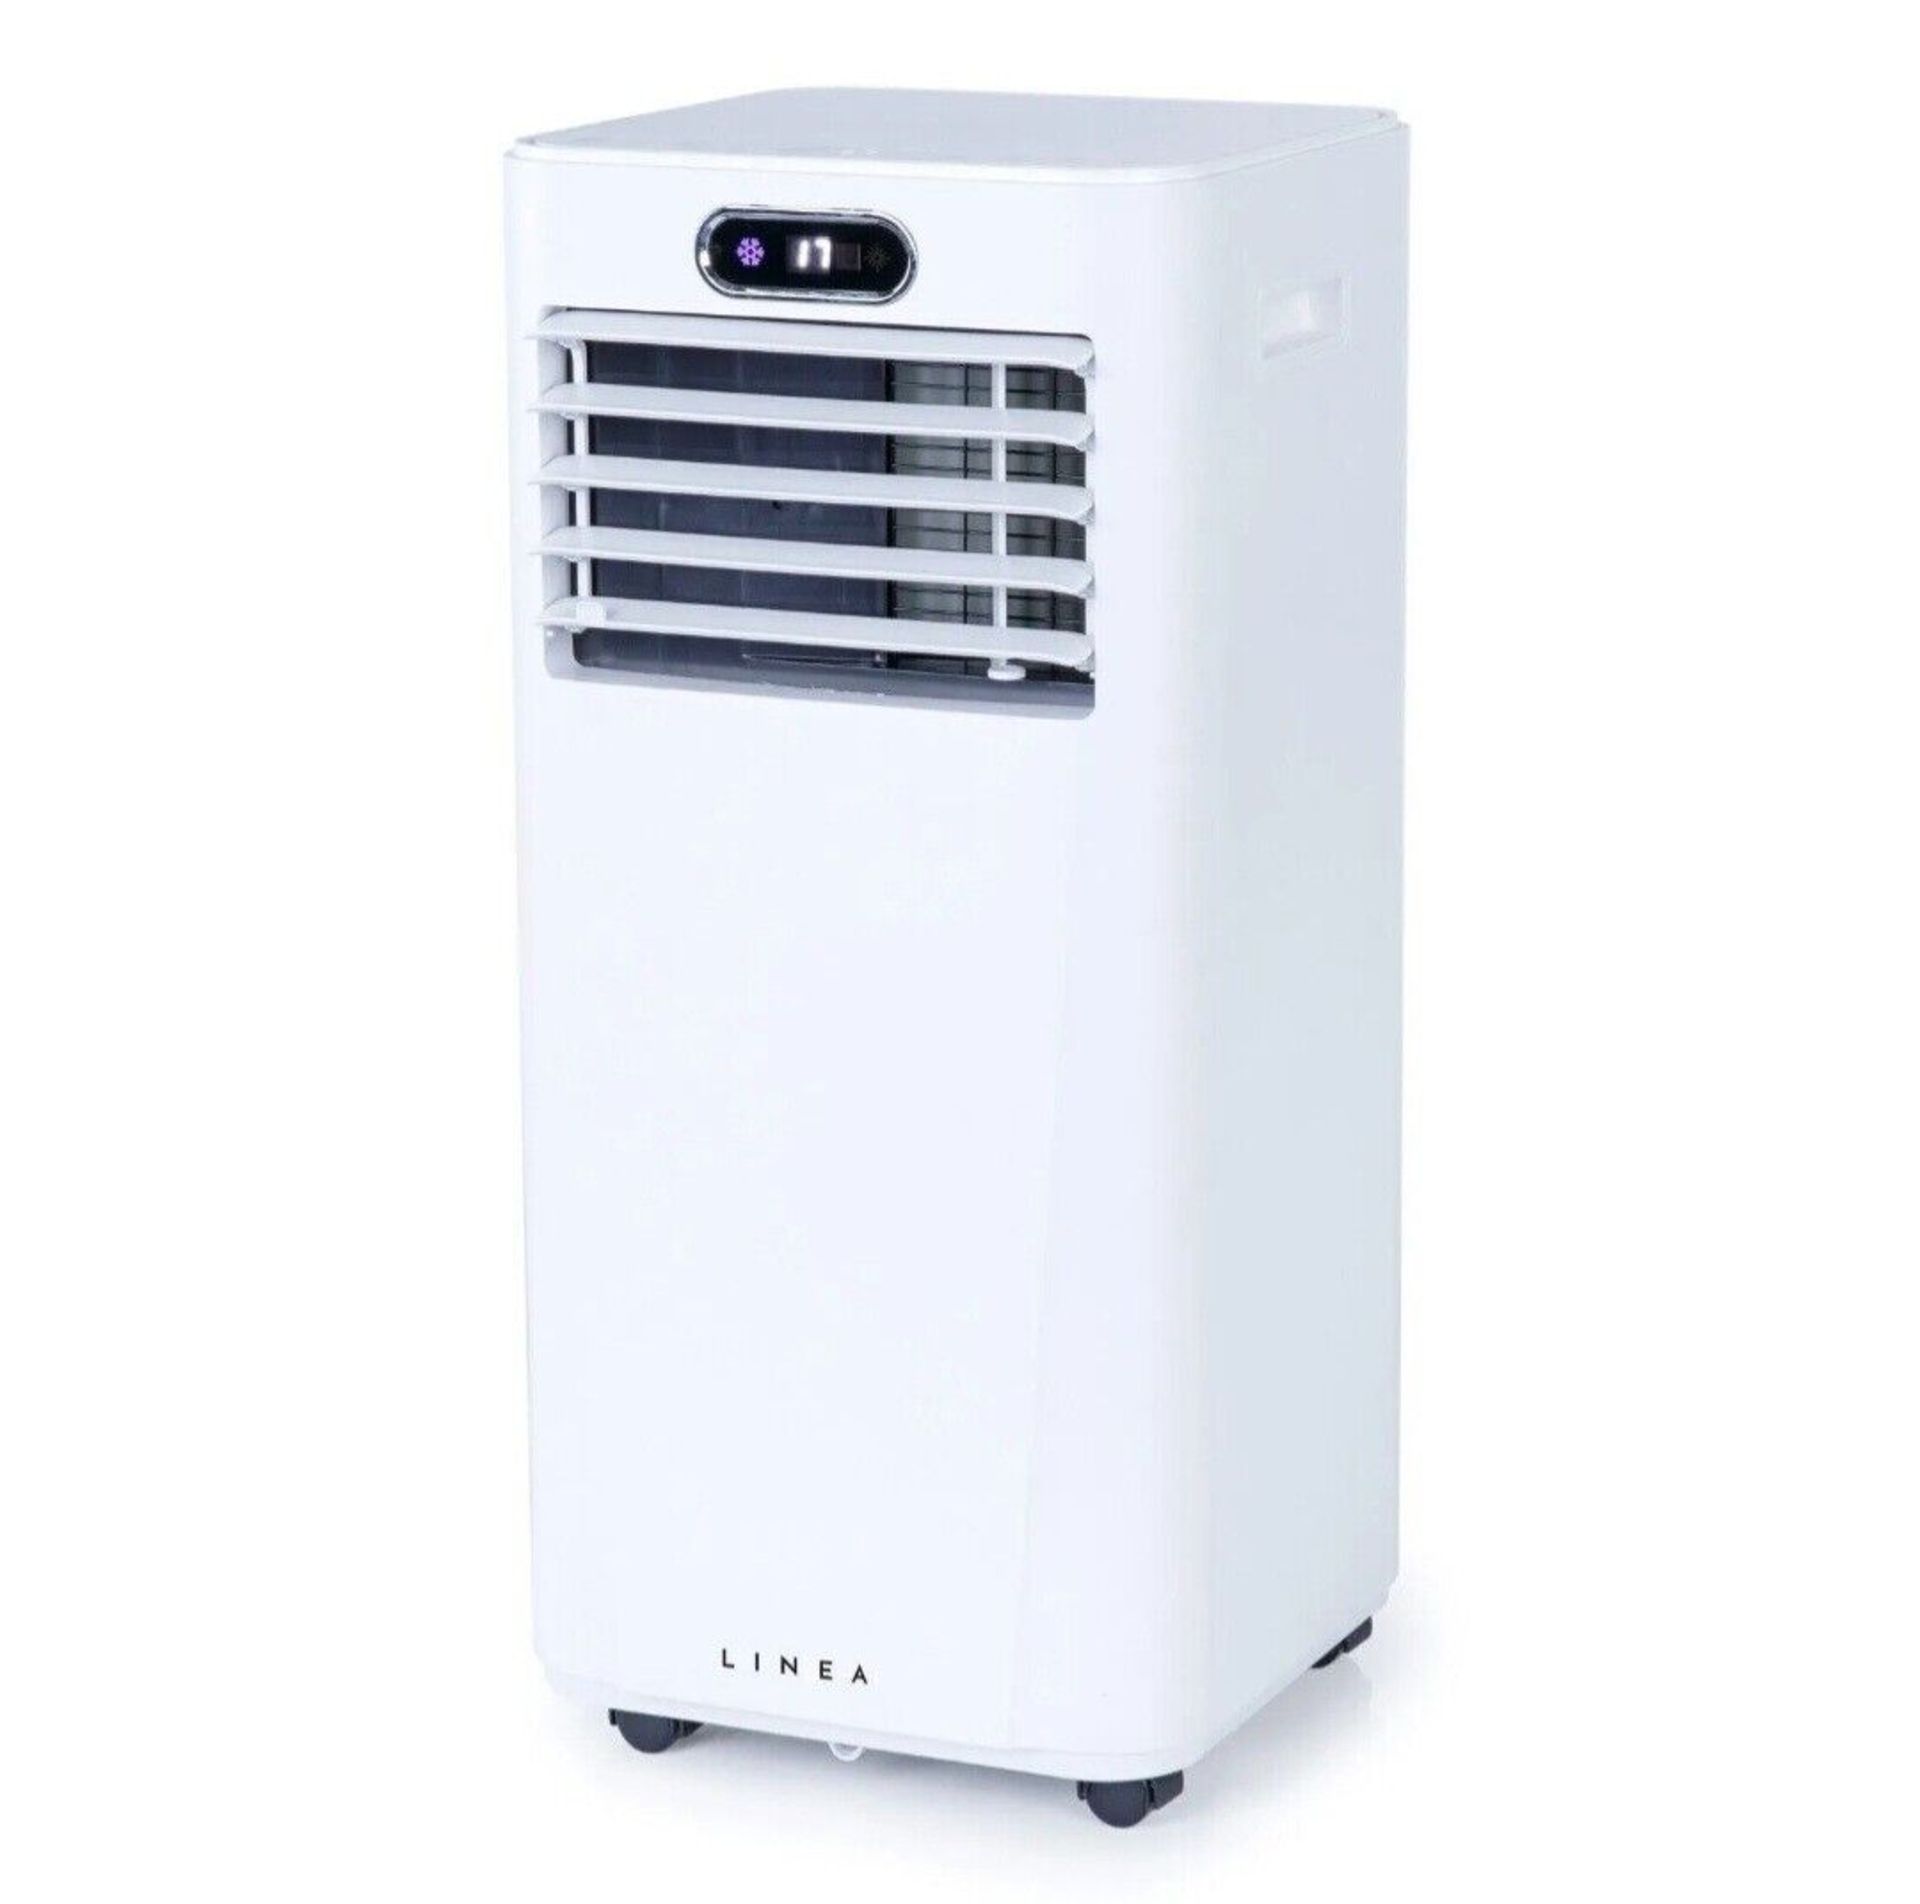 2 X BRAND NEW BOXED LINEA 7000BTU PORTABLE WHITE AIR CONDITIONING UNIT RRP £349, This Linea